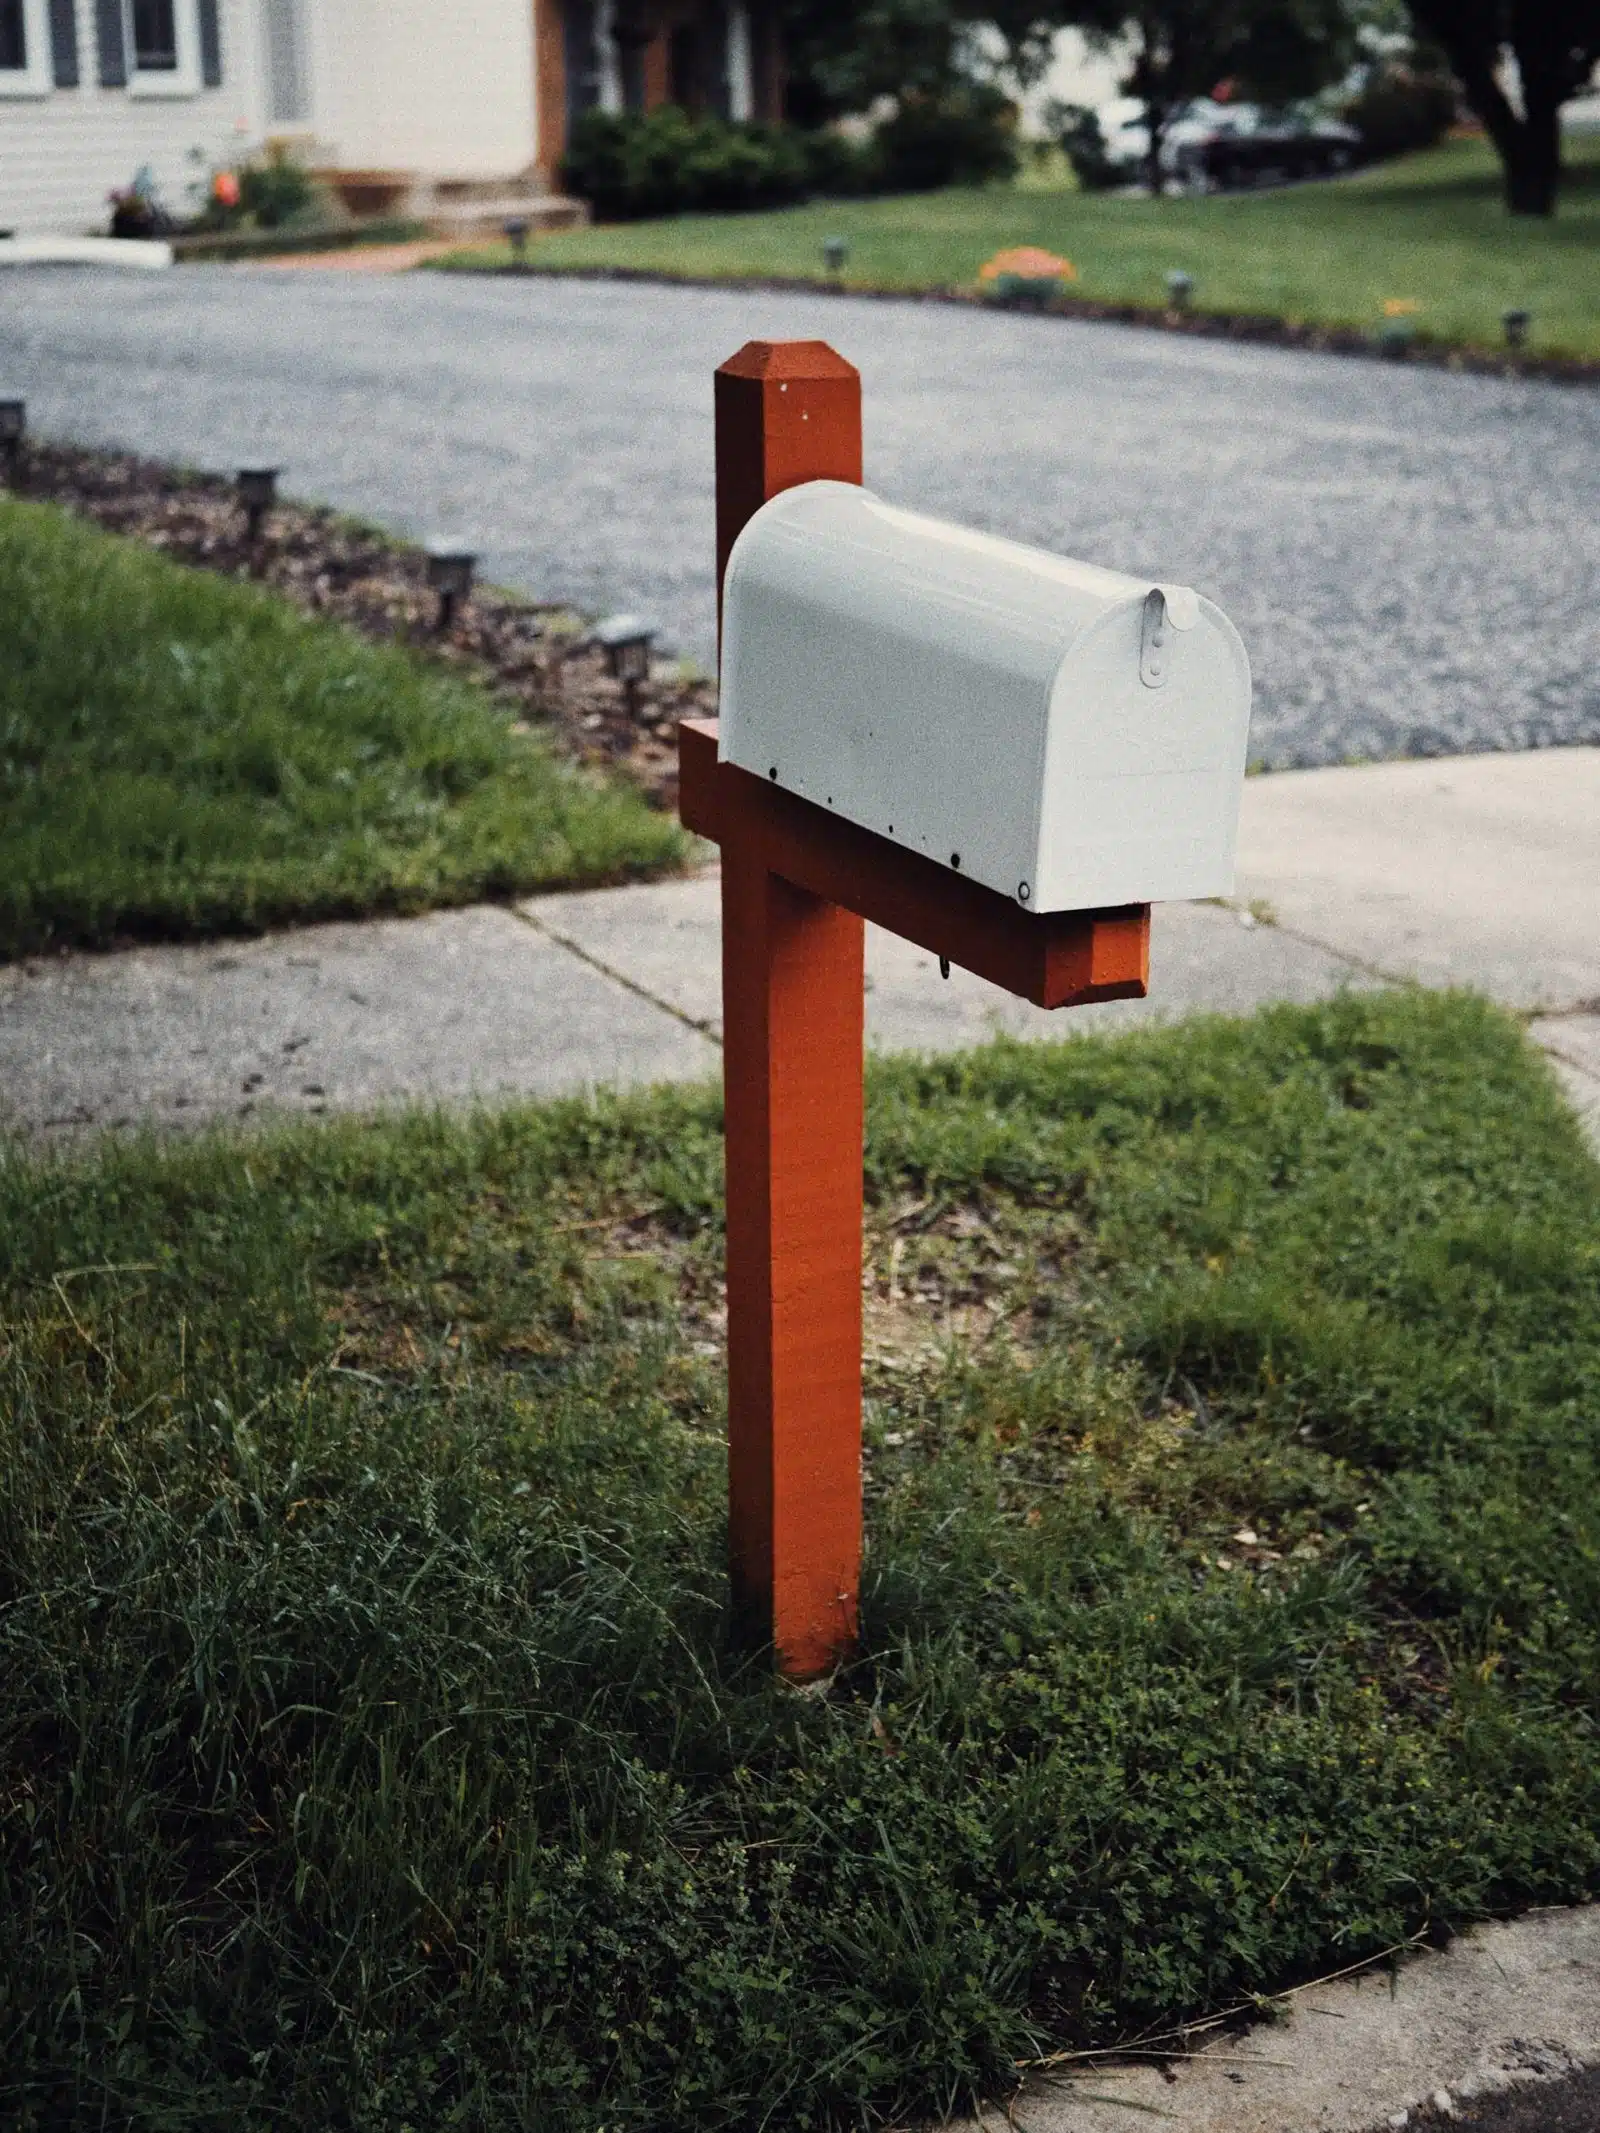 home security tips : empty mailbox